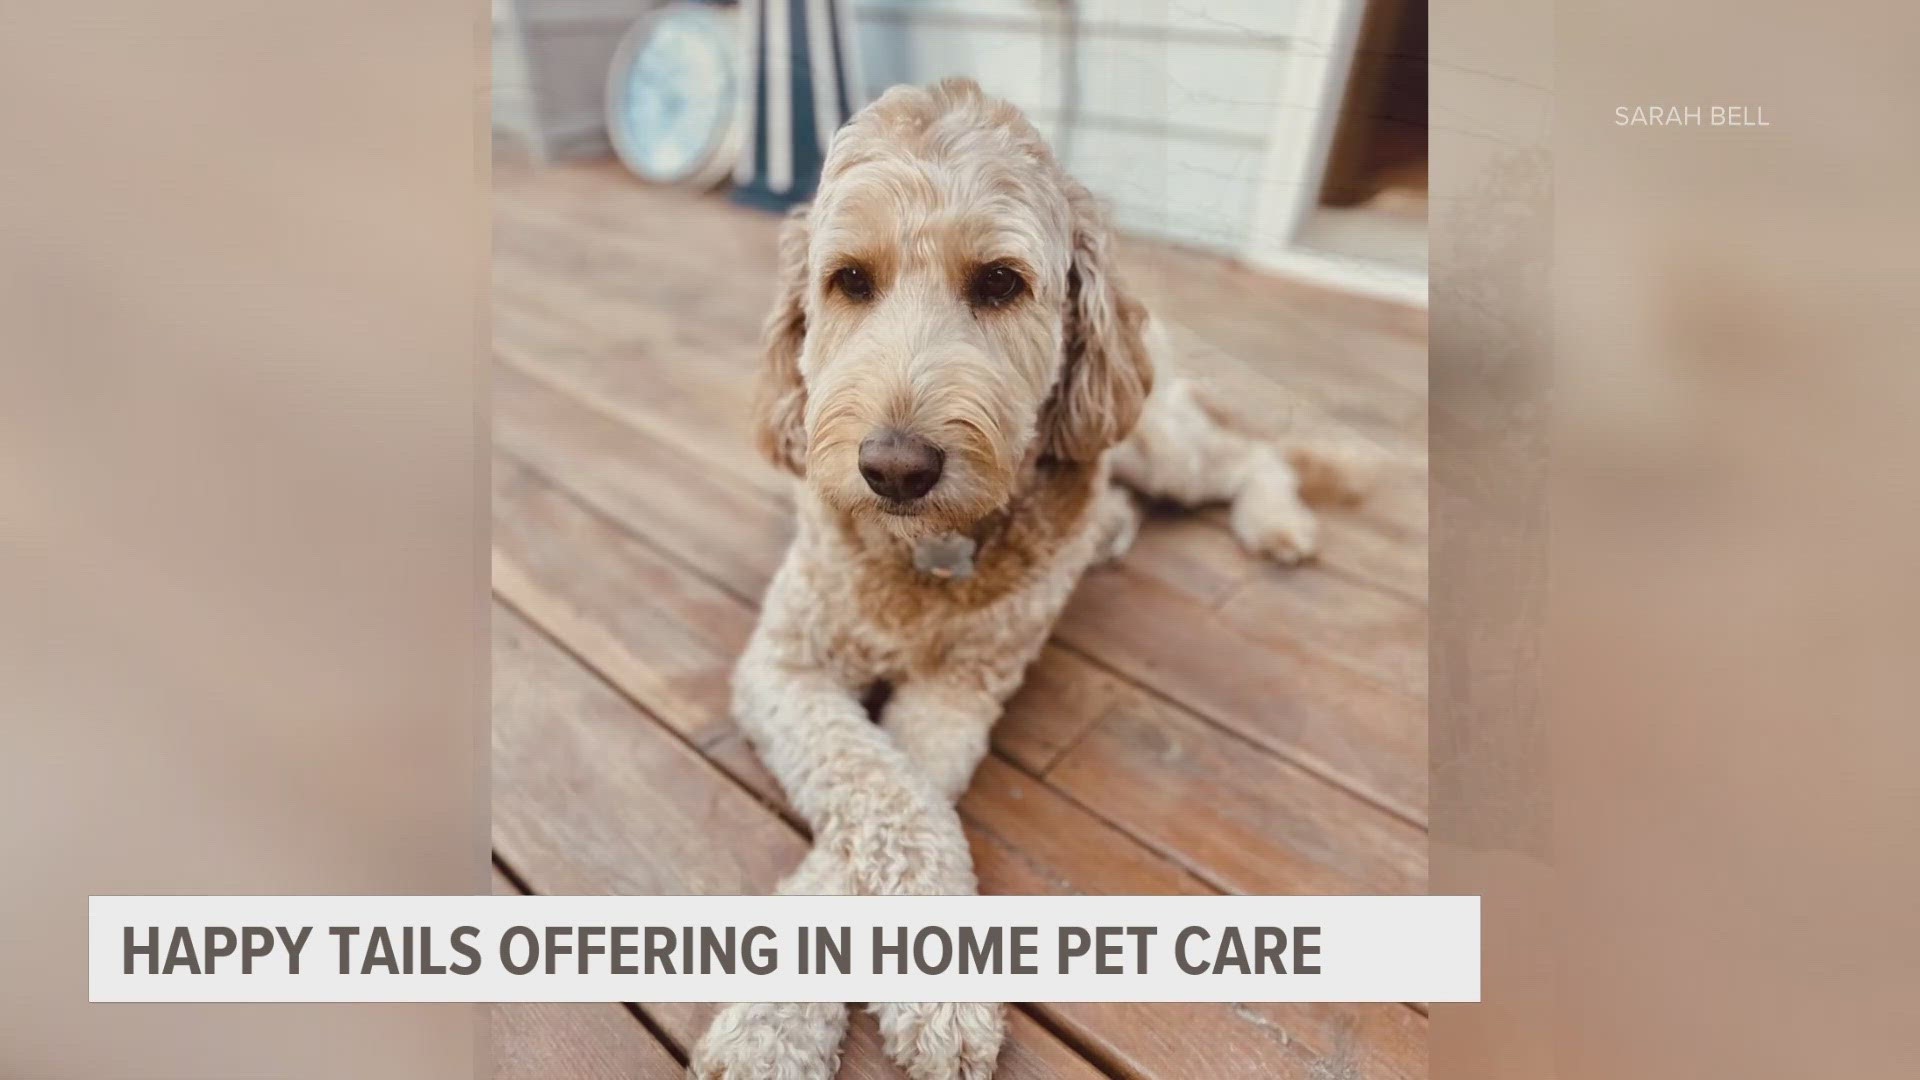 Happy Tails offers in-home pet care. Hear from the company's founder, Sarah Bell.